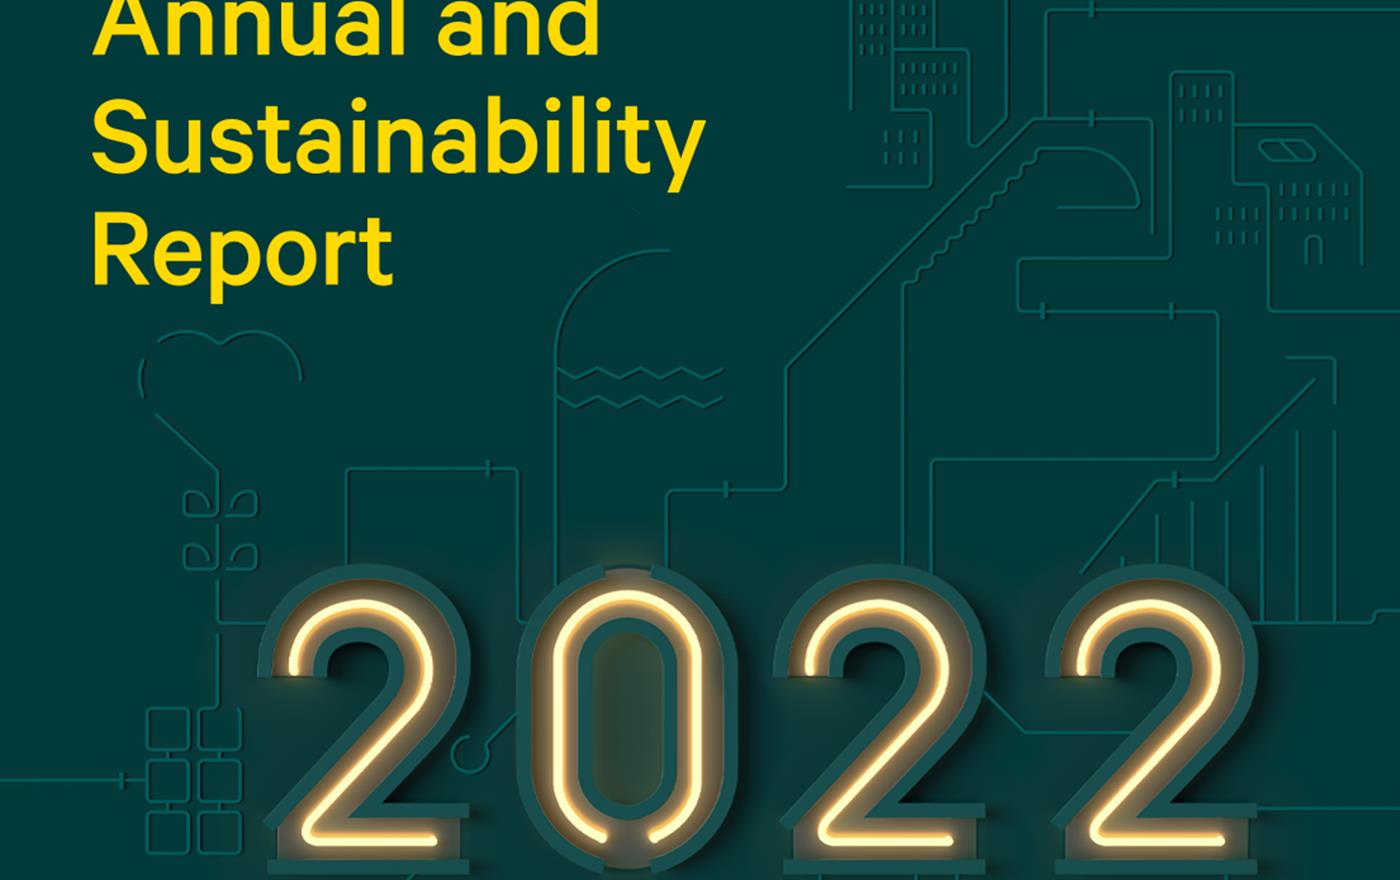 Assemblin’s Annual and Sustainability Report for 2022 is now published